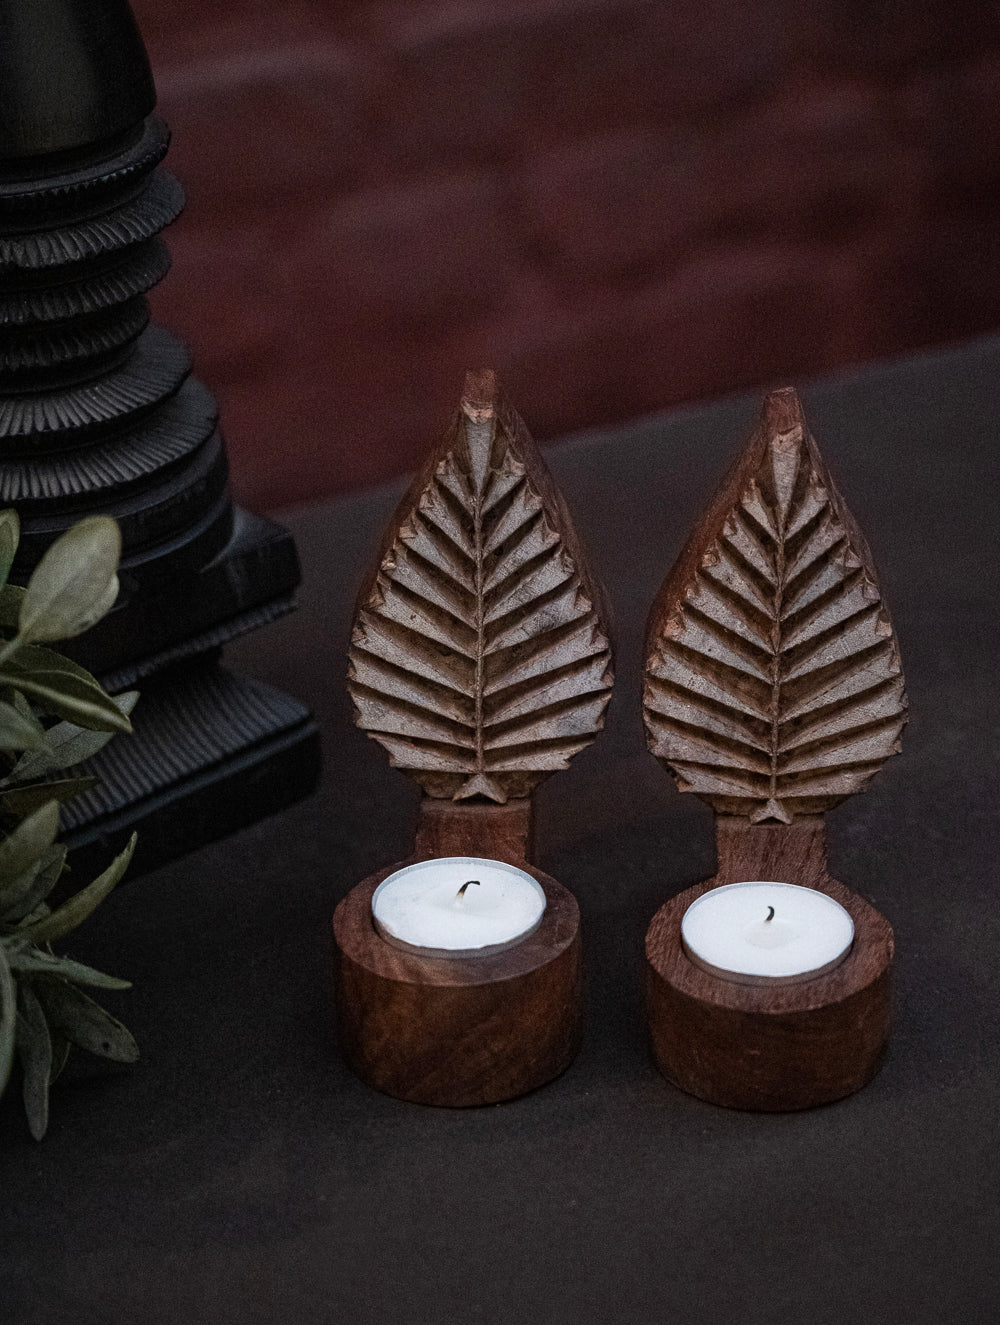 Load image into Gallery viewer, Nazakat. Exclusive, Fine Hand Engraved Wood Block Tealight Holders (Set of 2) - Leaves